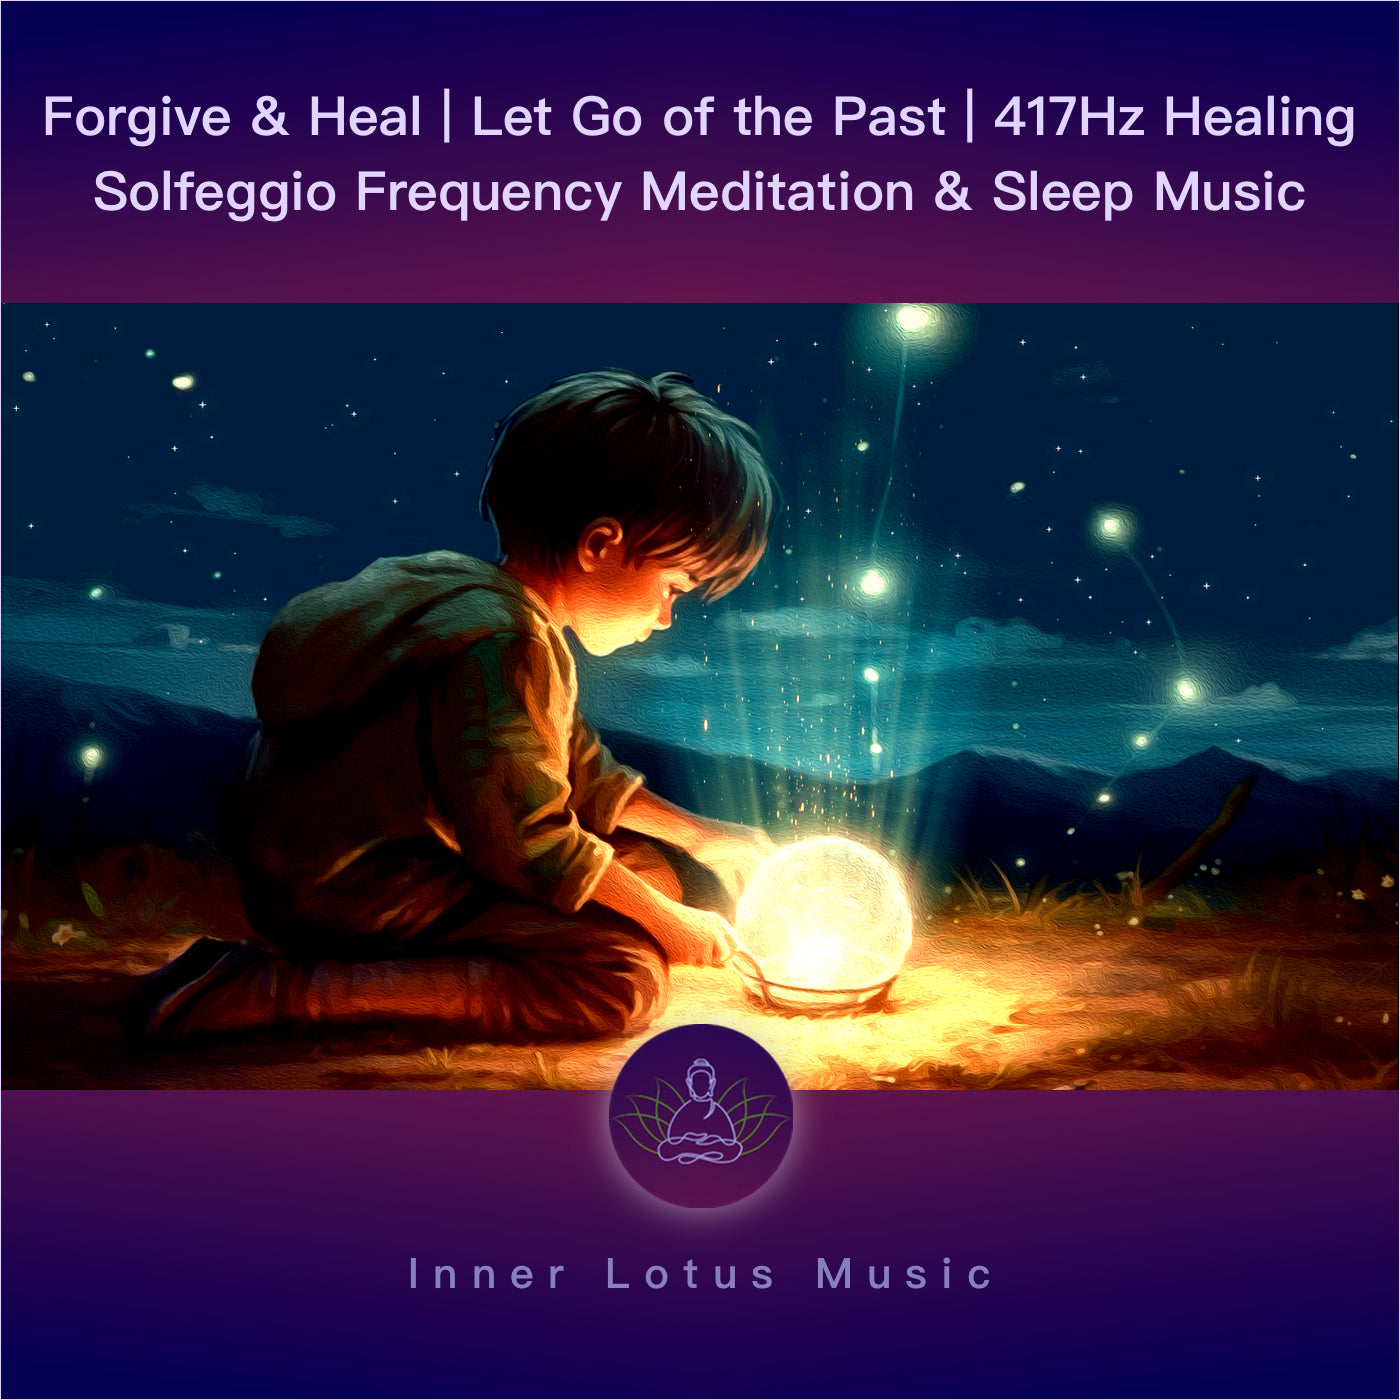 Forgive & Heal | Let Go of the Past | 417Hz Healing Solfeggio Frequency Meditation & Sleep Music